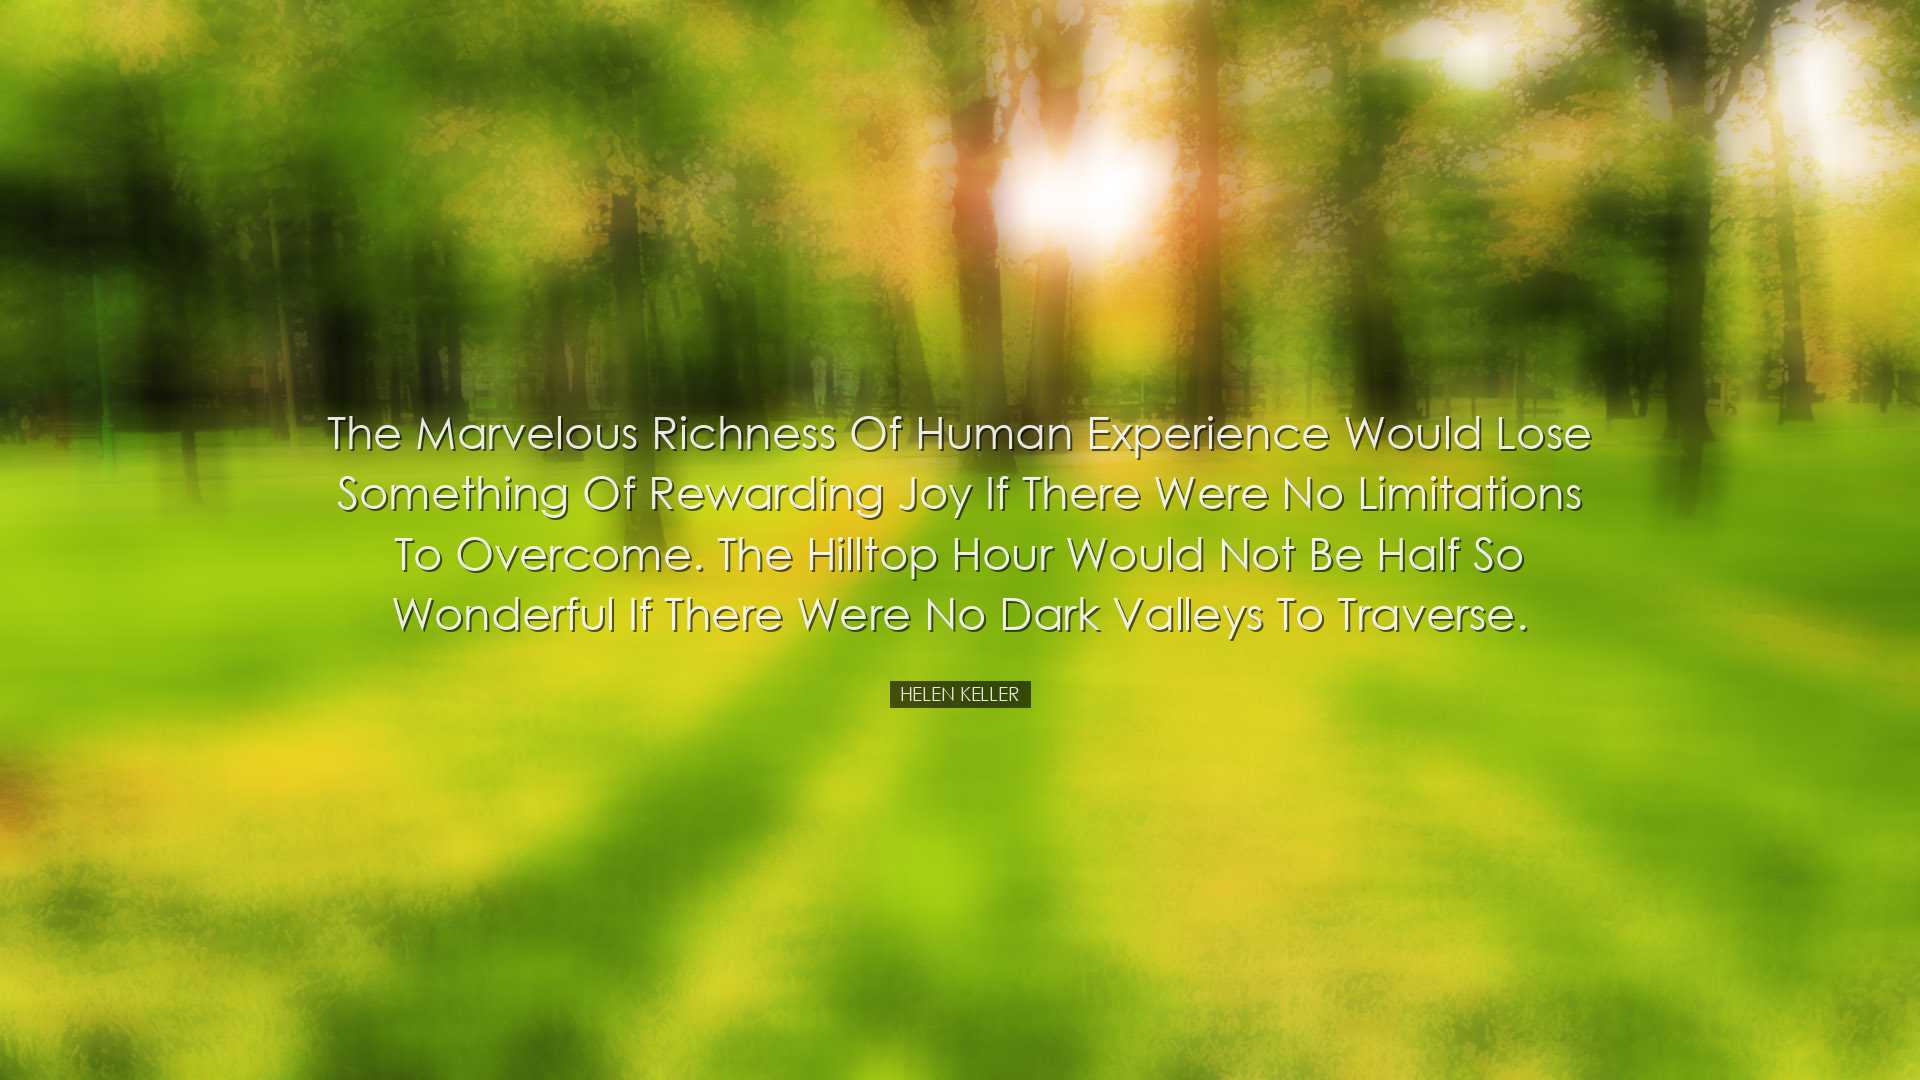 The marvelous richness of human experience would lose something of